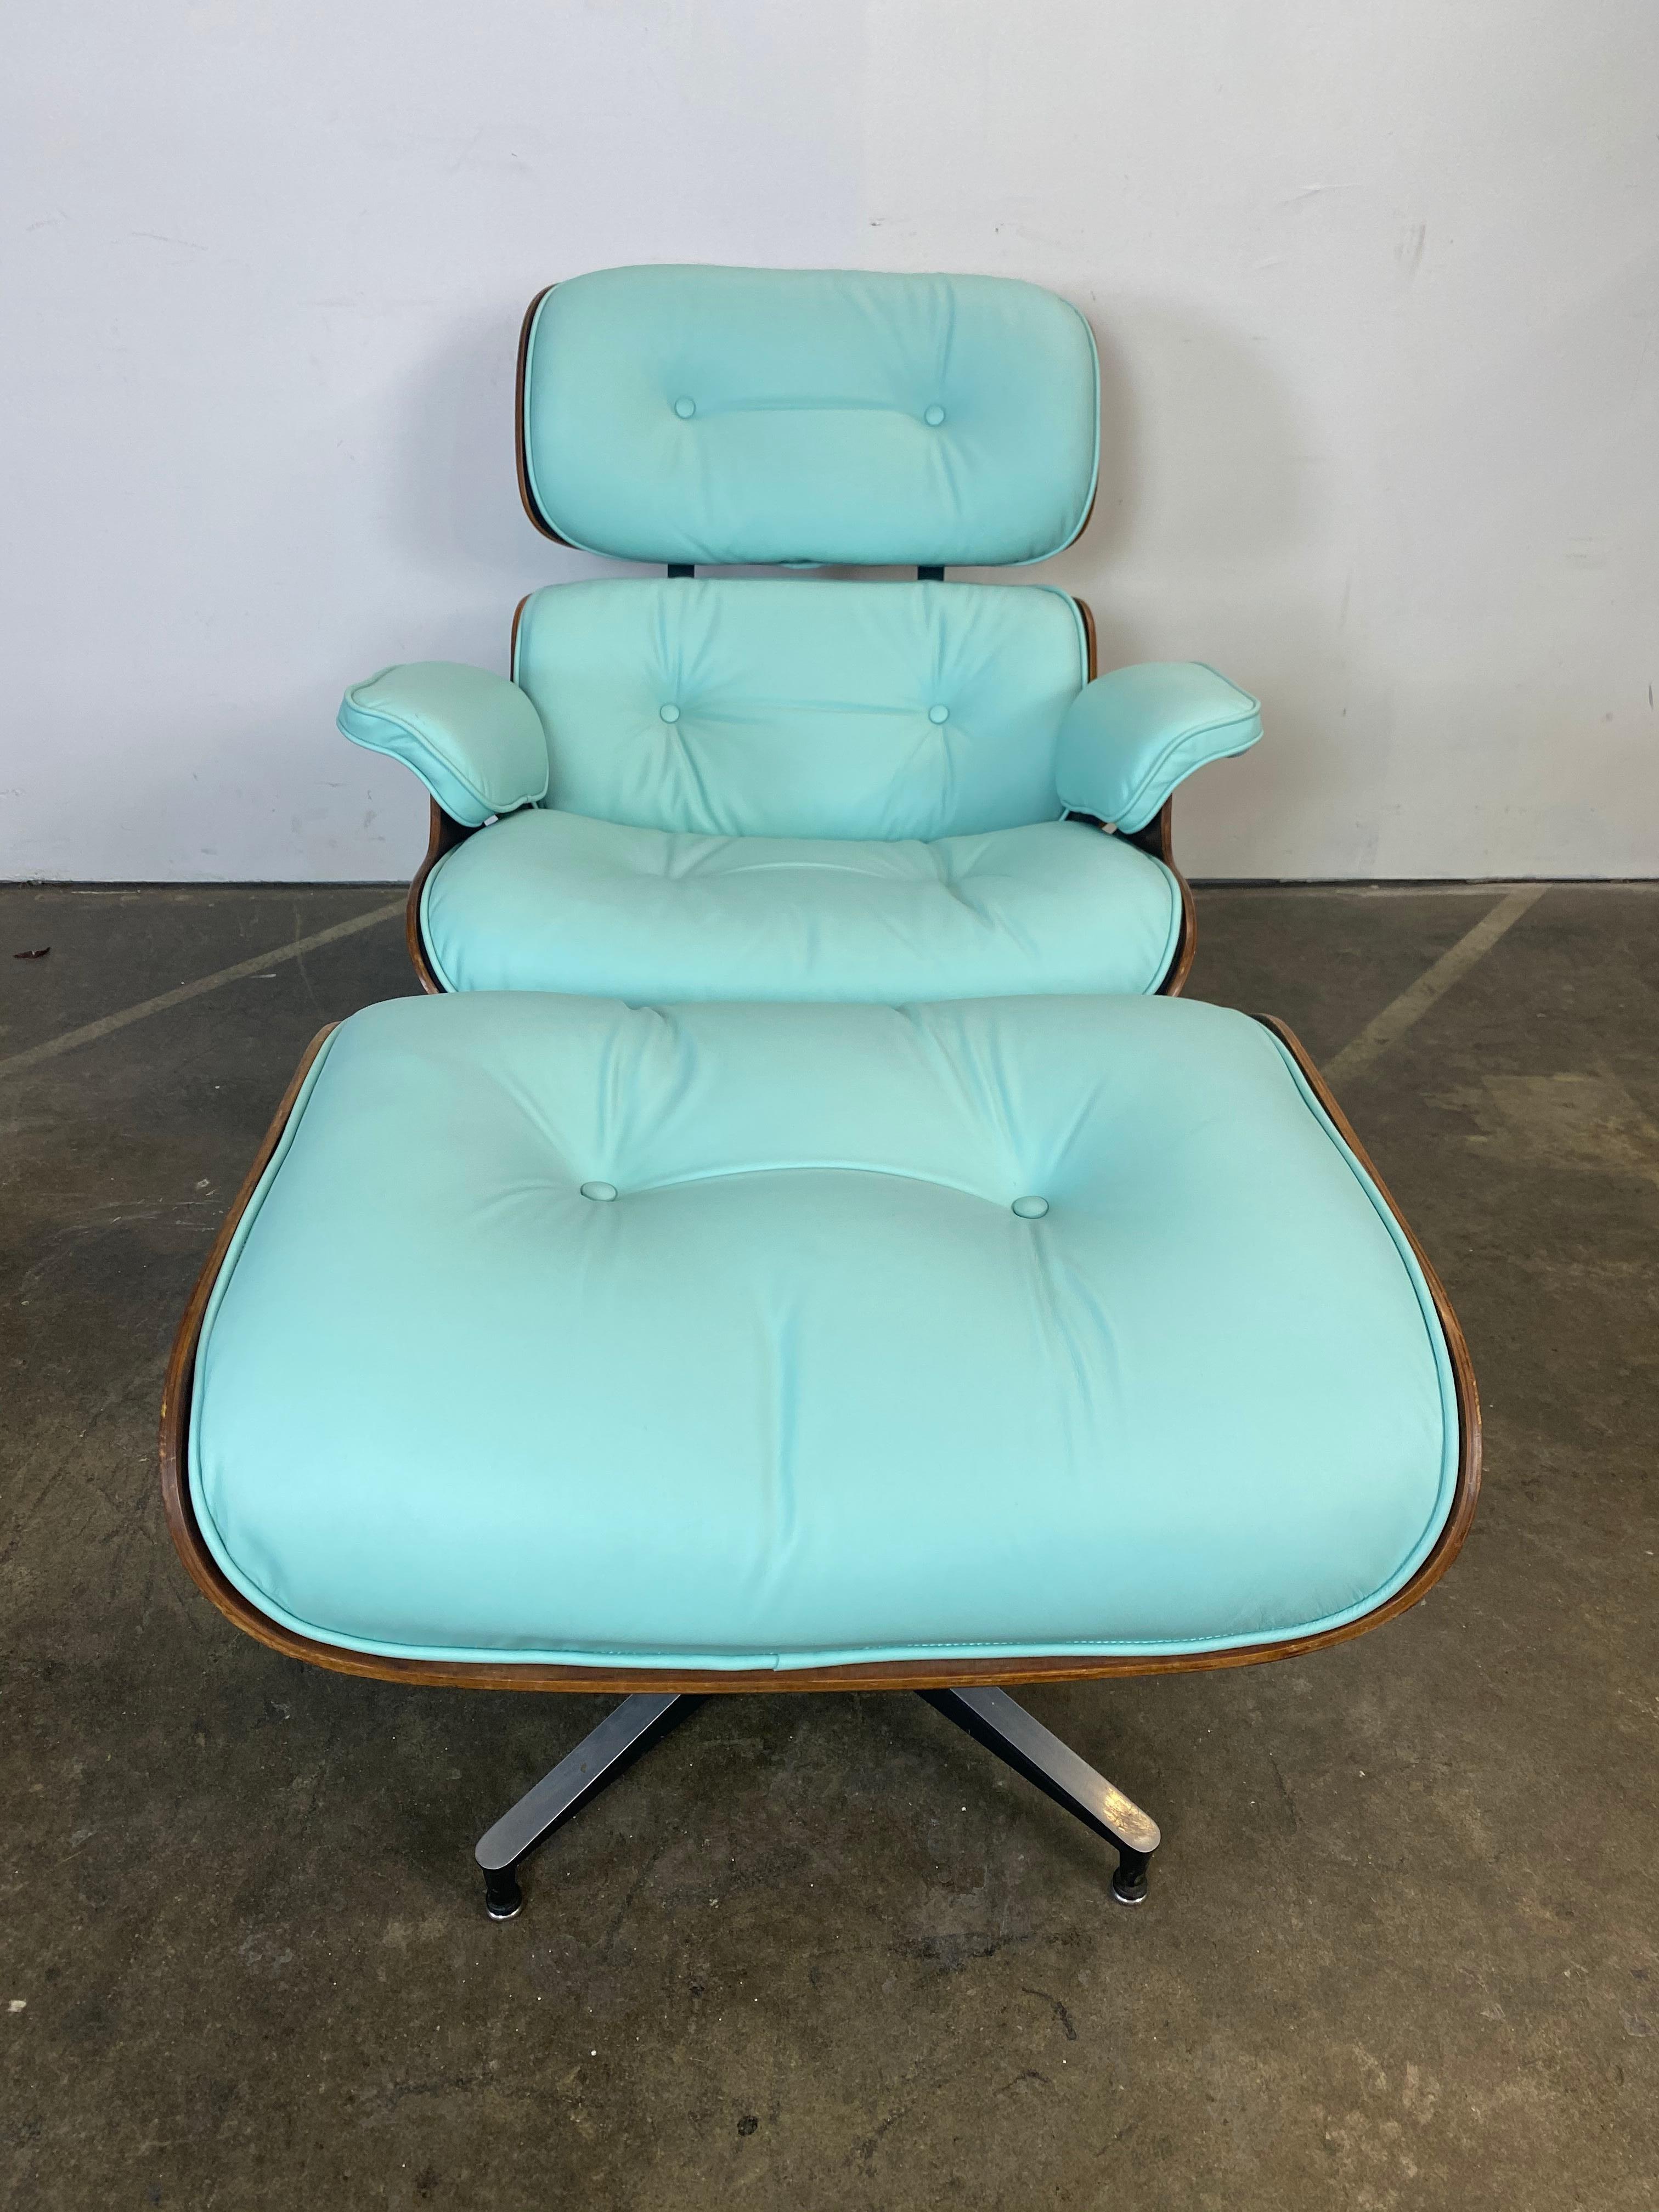 A spectacular vintage Eames lounge chair and ottoman executed in brand new leather. We have never come across this color before. The vintage wood and metal have been cleaned and the chair and ottoman are guaranteed authentic. Signed with Herman